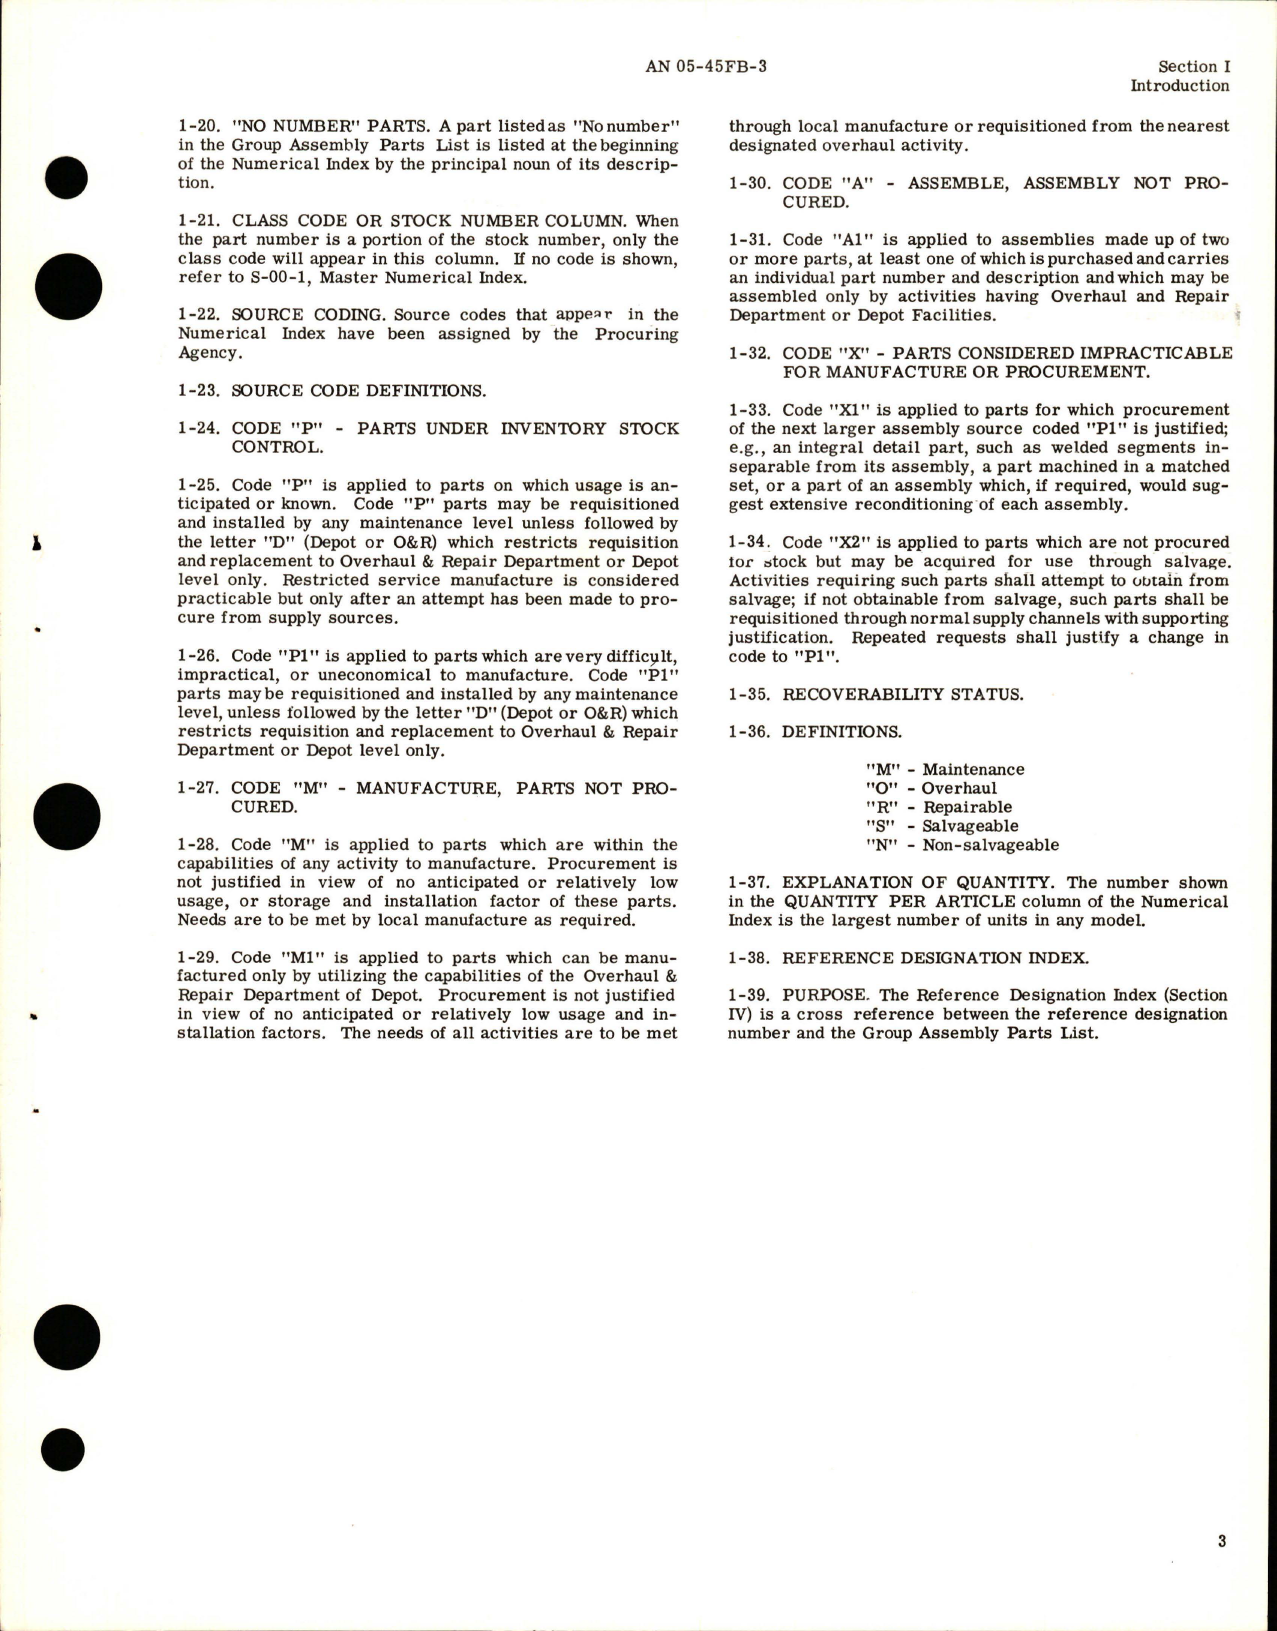 Sample page 5 from AirCorps Library document: Illustrated Parts Breakdown for Control Amplifier and Power Adapter for G-3 Auto Pilot Models 2CJ4B1and 2CJ4B3